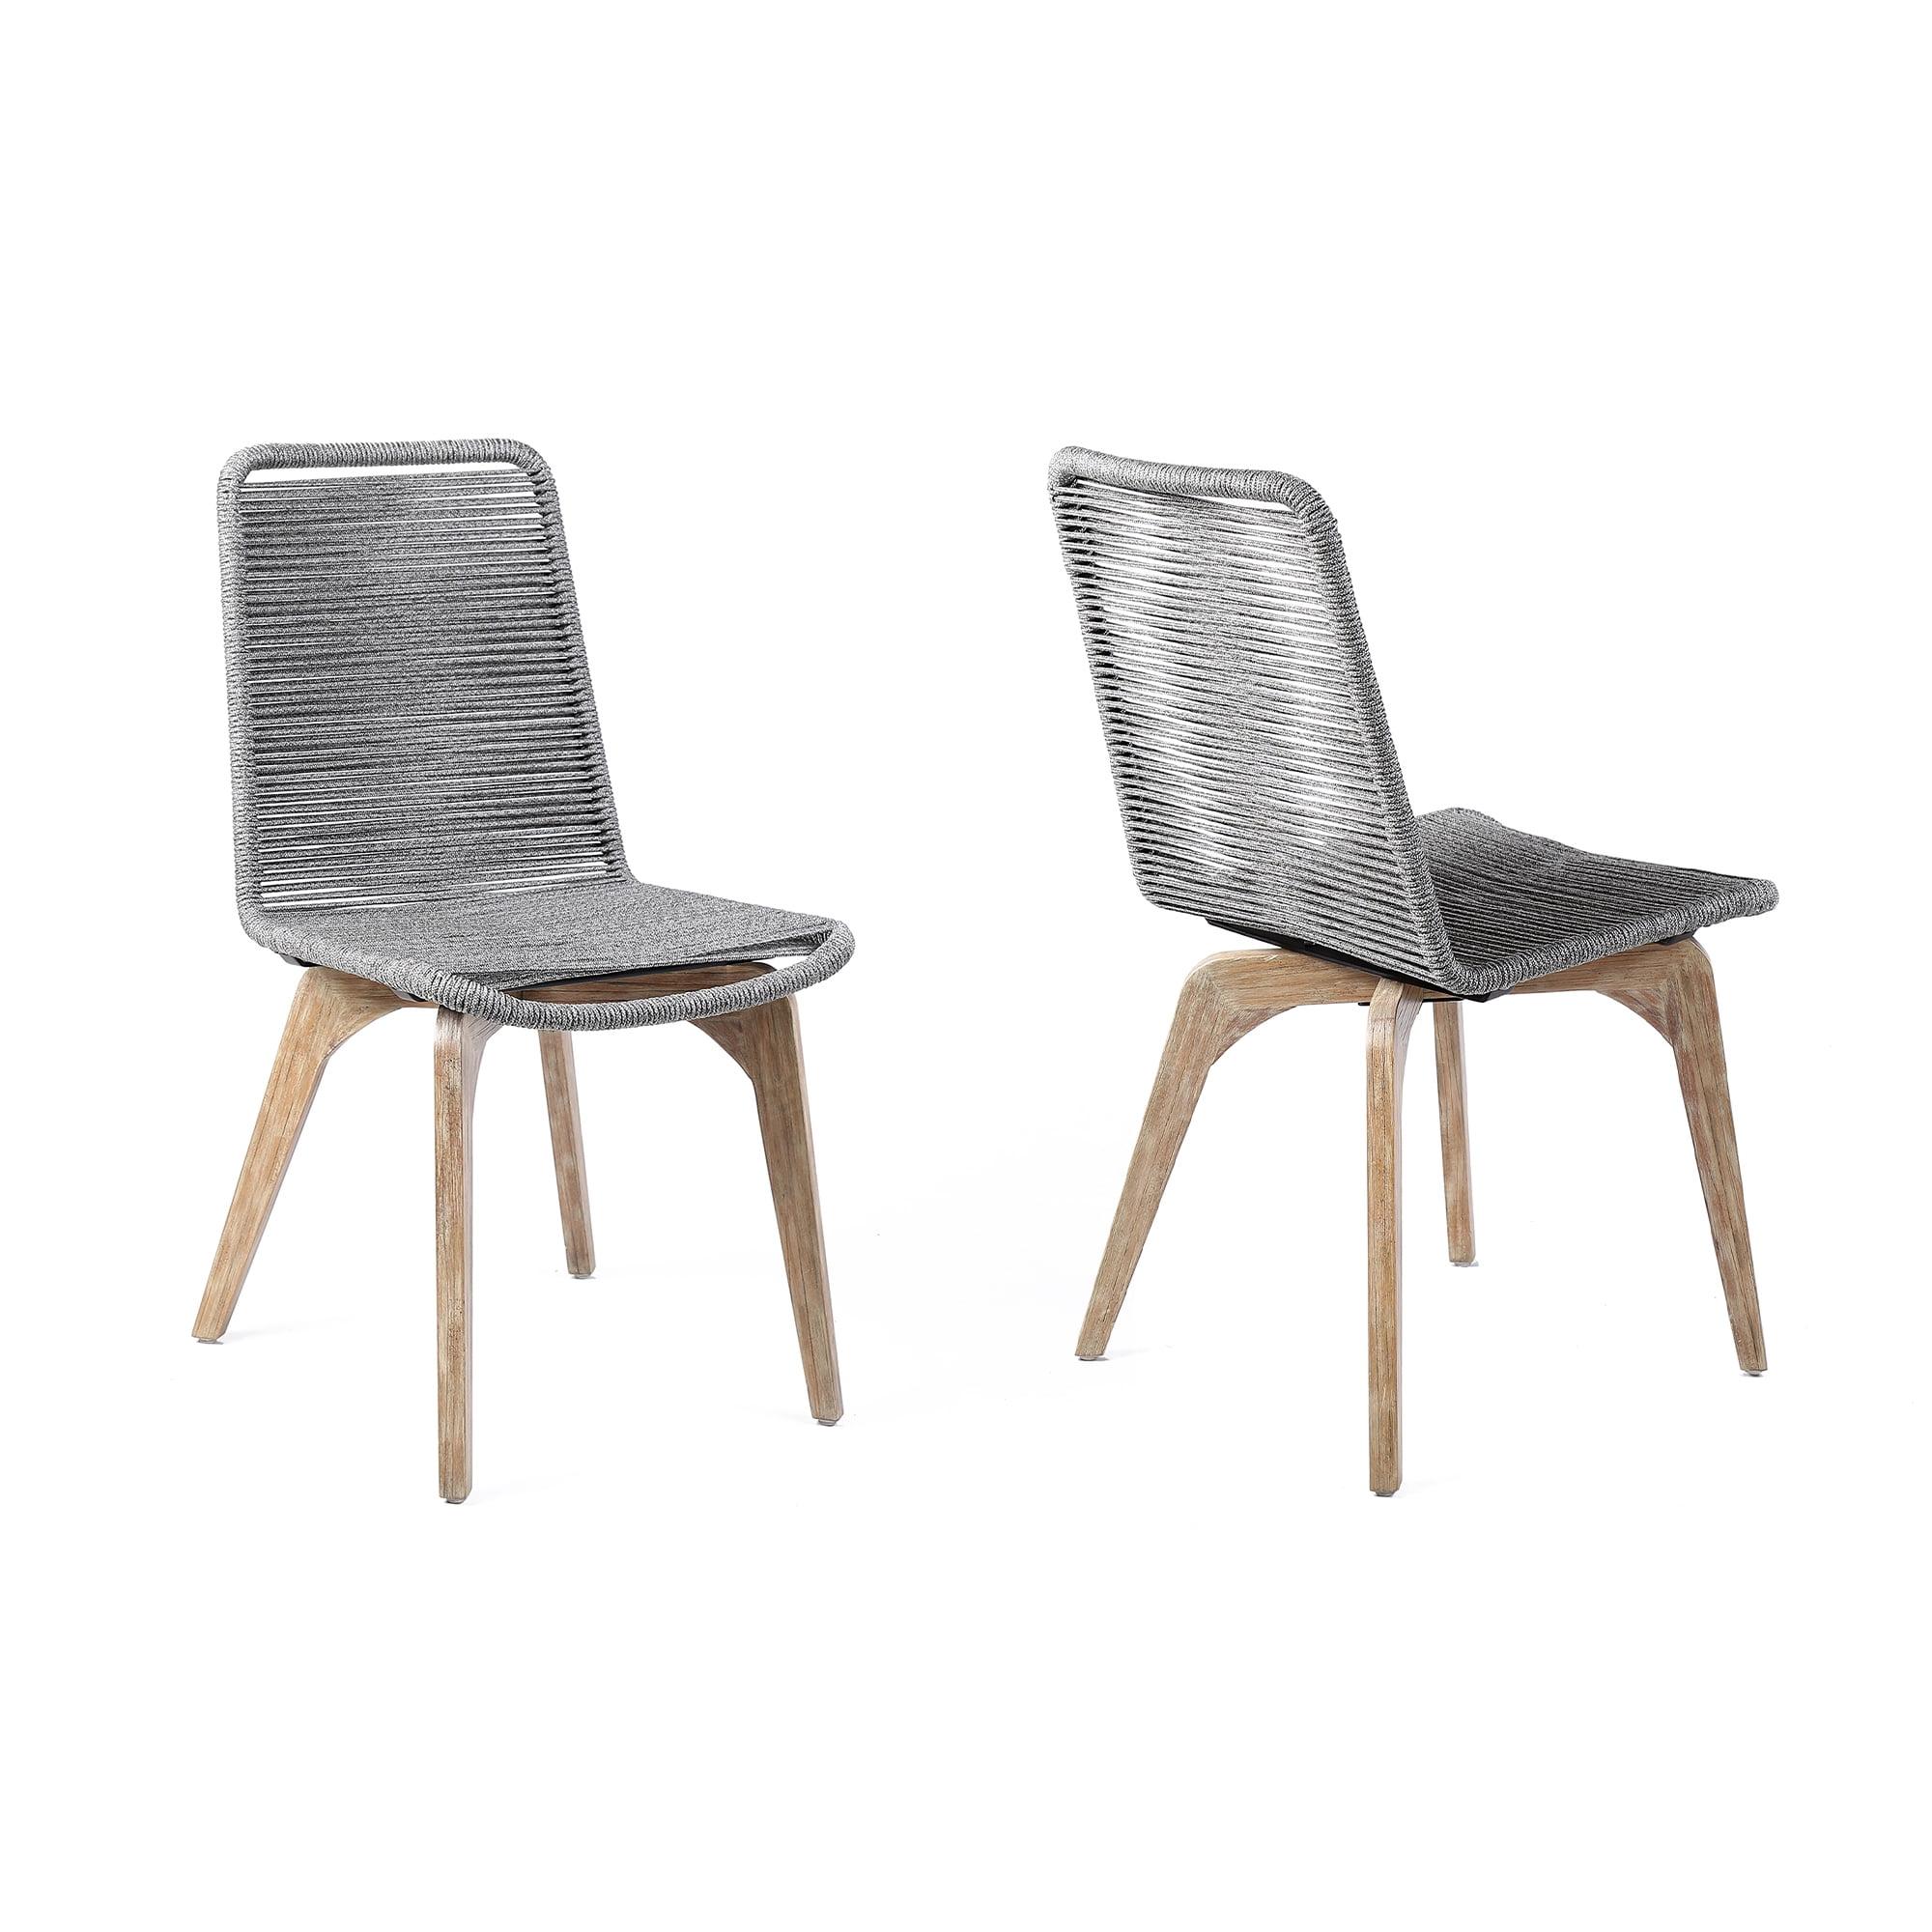 Gray Rope and Eucalyptus Wood Outdoor Dining Chairs, Set of 2